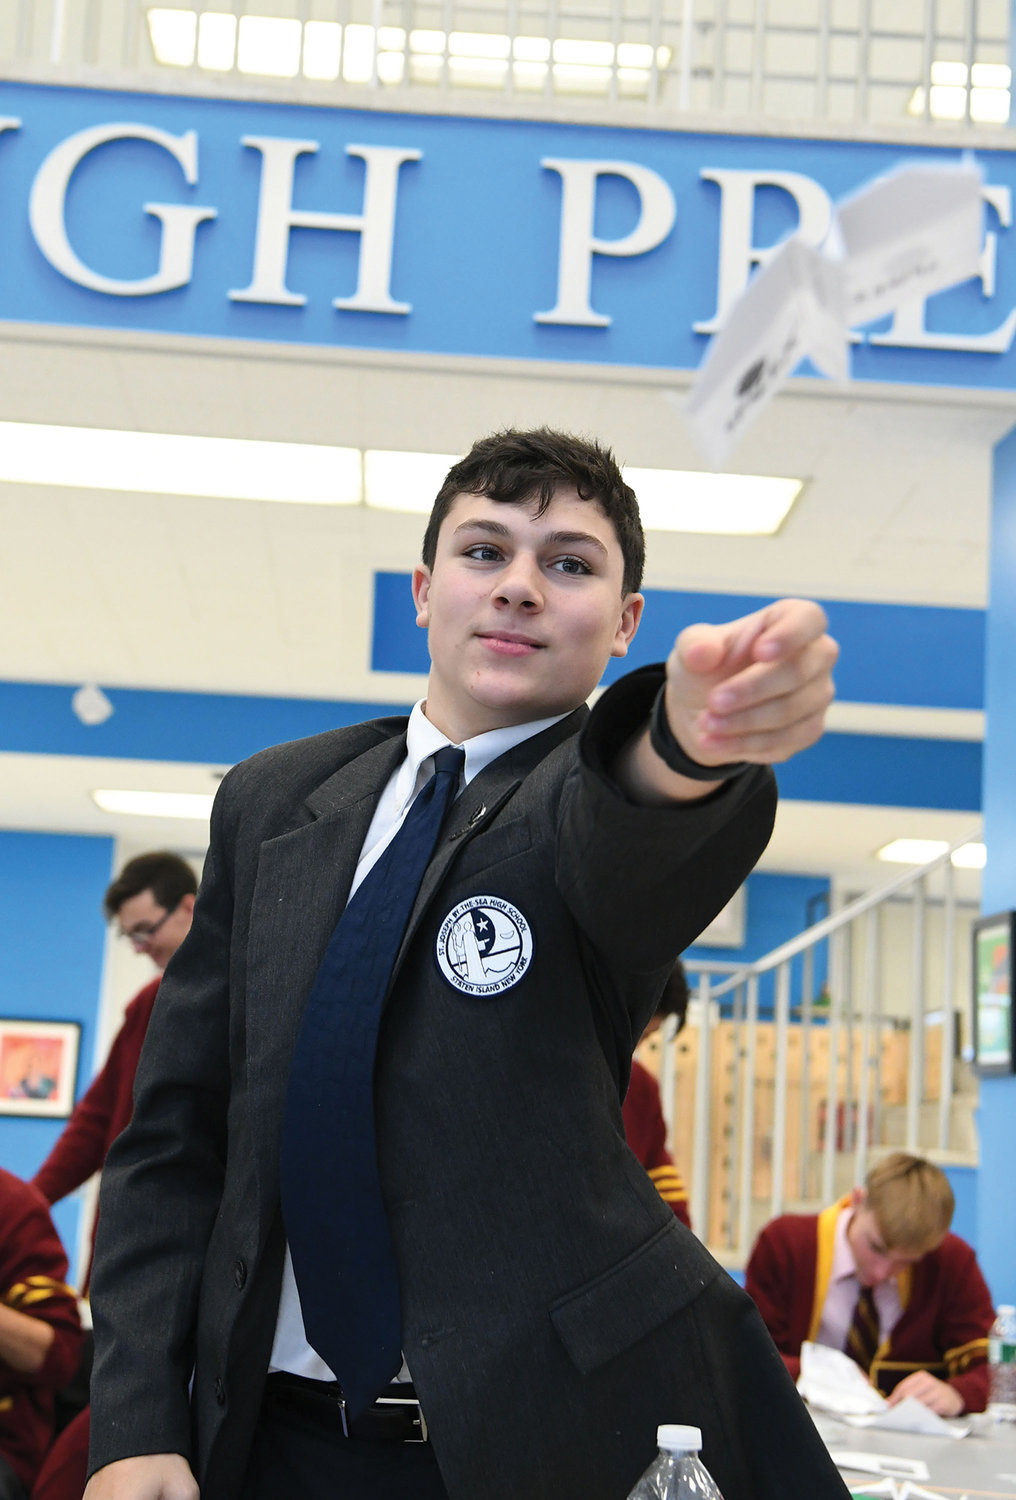 Frank Falcone, a student at St. Joseph by-the-Sea, sends his paper airplane soaring on a test flight.